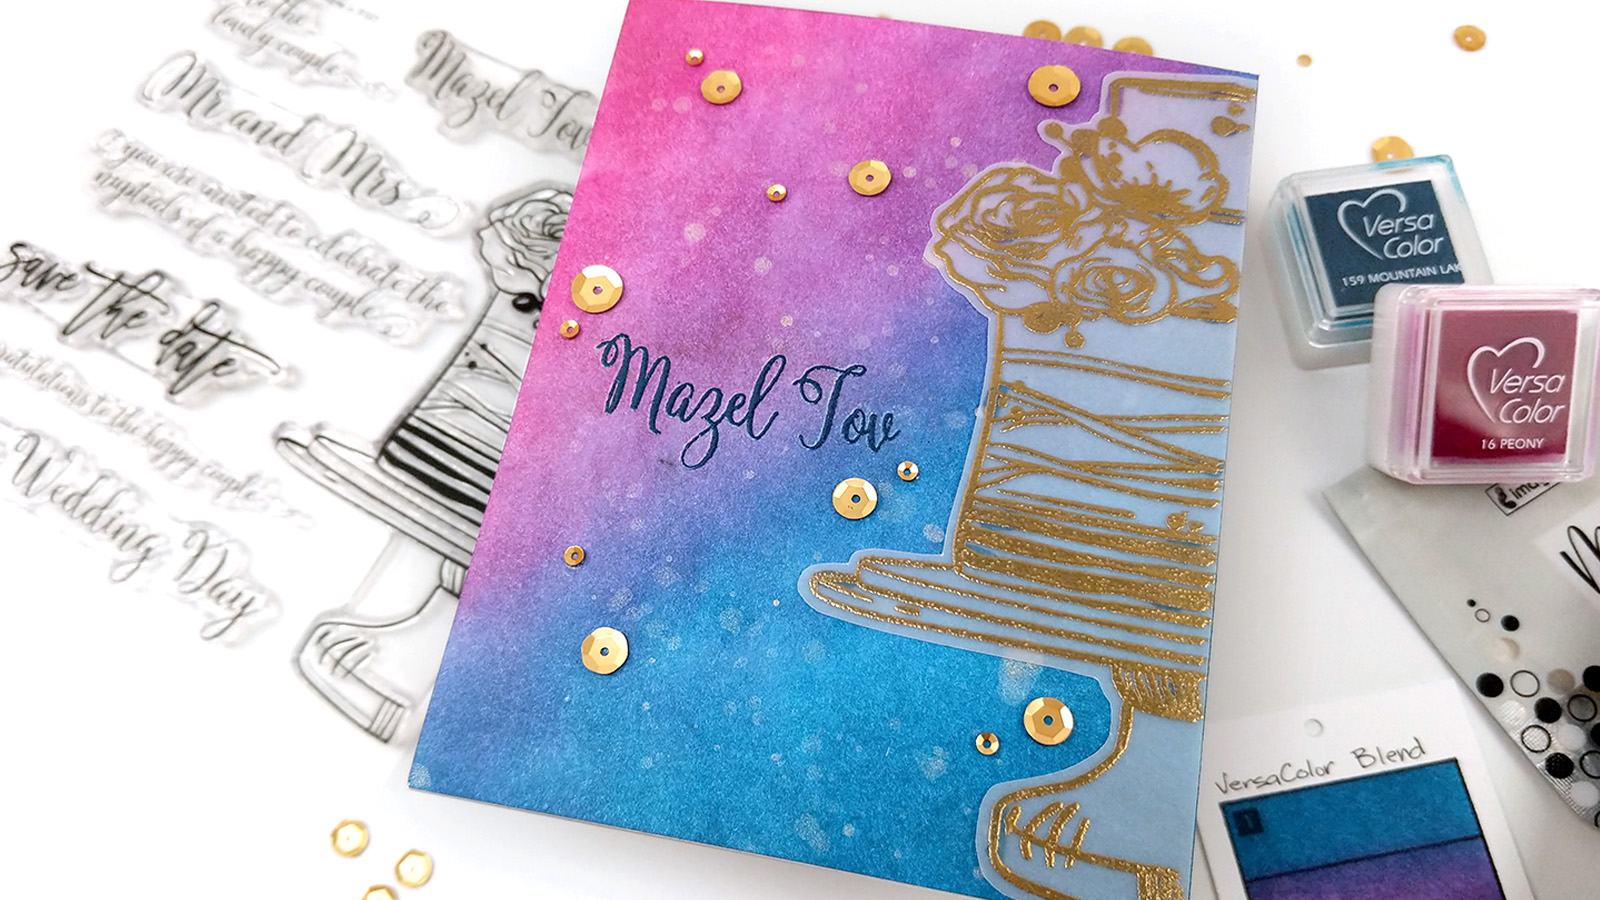 versacolor pigment ink pad in pink and blue ink blended for a wedding mazel tov greeting card